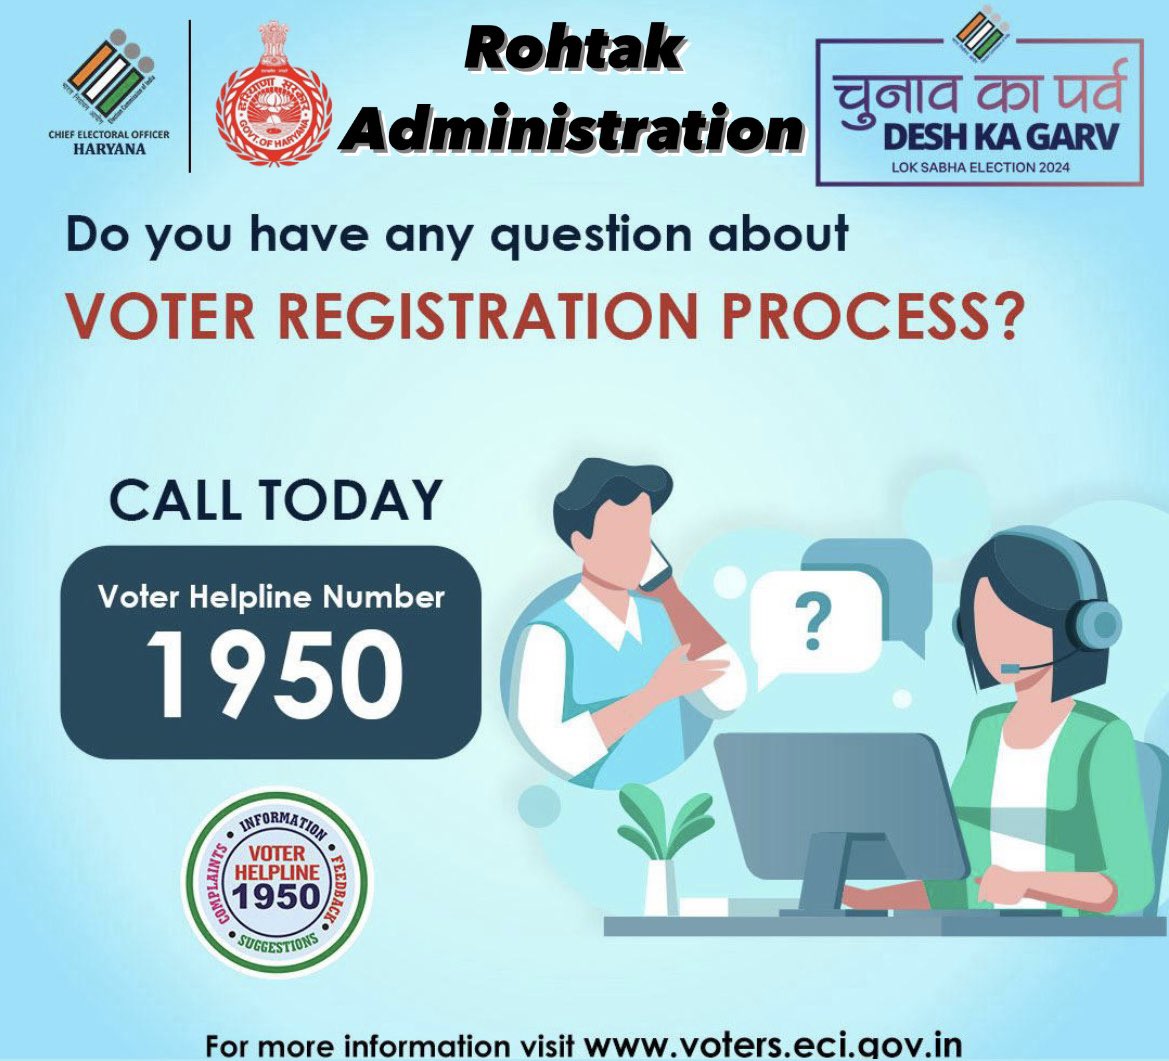 ➡️ Got questions about the #voter registration process? Call the Voter #Helpline at 1950! ☎️ Available 24/7 to assist you.

💁🏼‍♀️  For detailed info and assistance, visit: voters.eci.gov.in 

 #ChunavKaParv #DeshKaGarv 
#SVEEP #ESI 
#VoterRegistration #Rohtak #Election2024